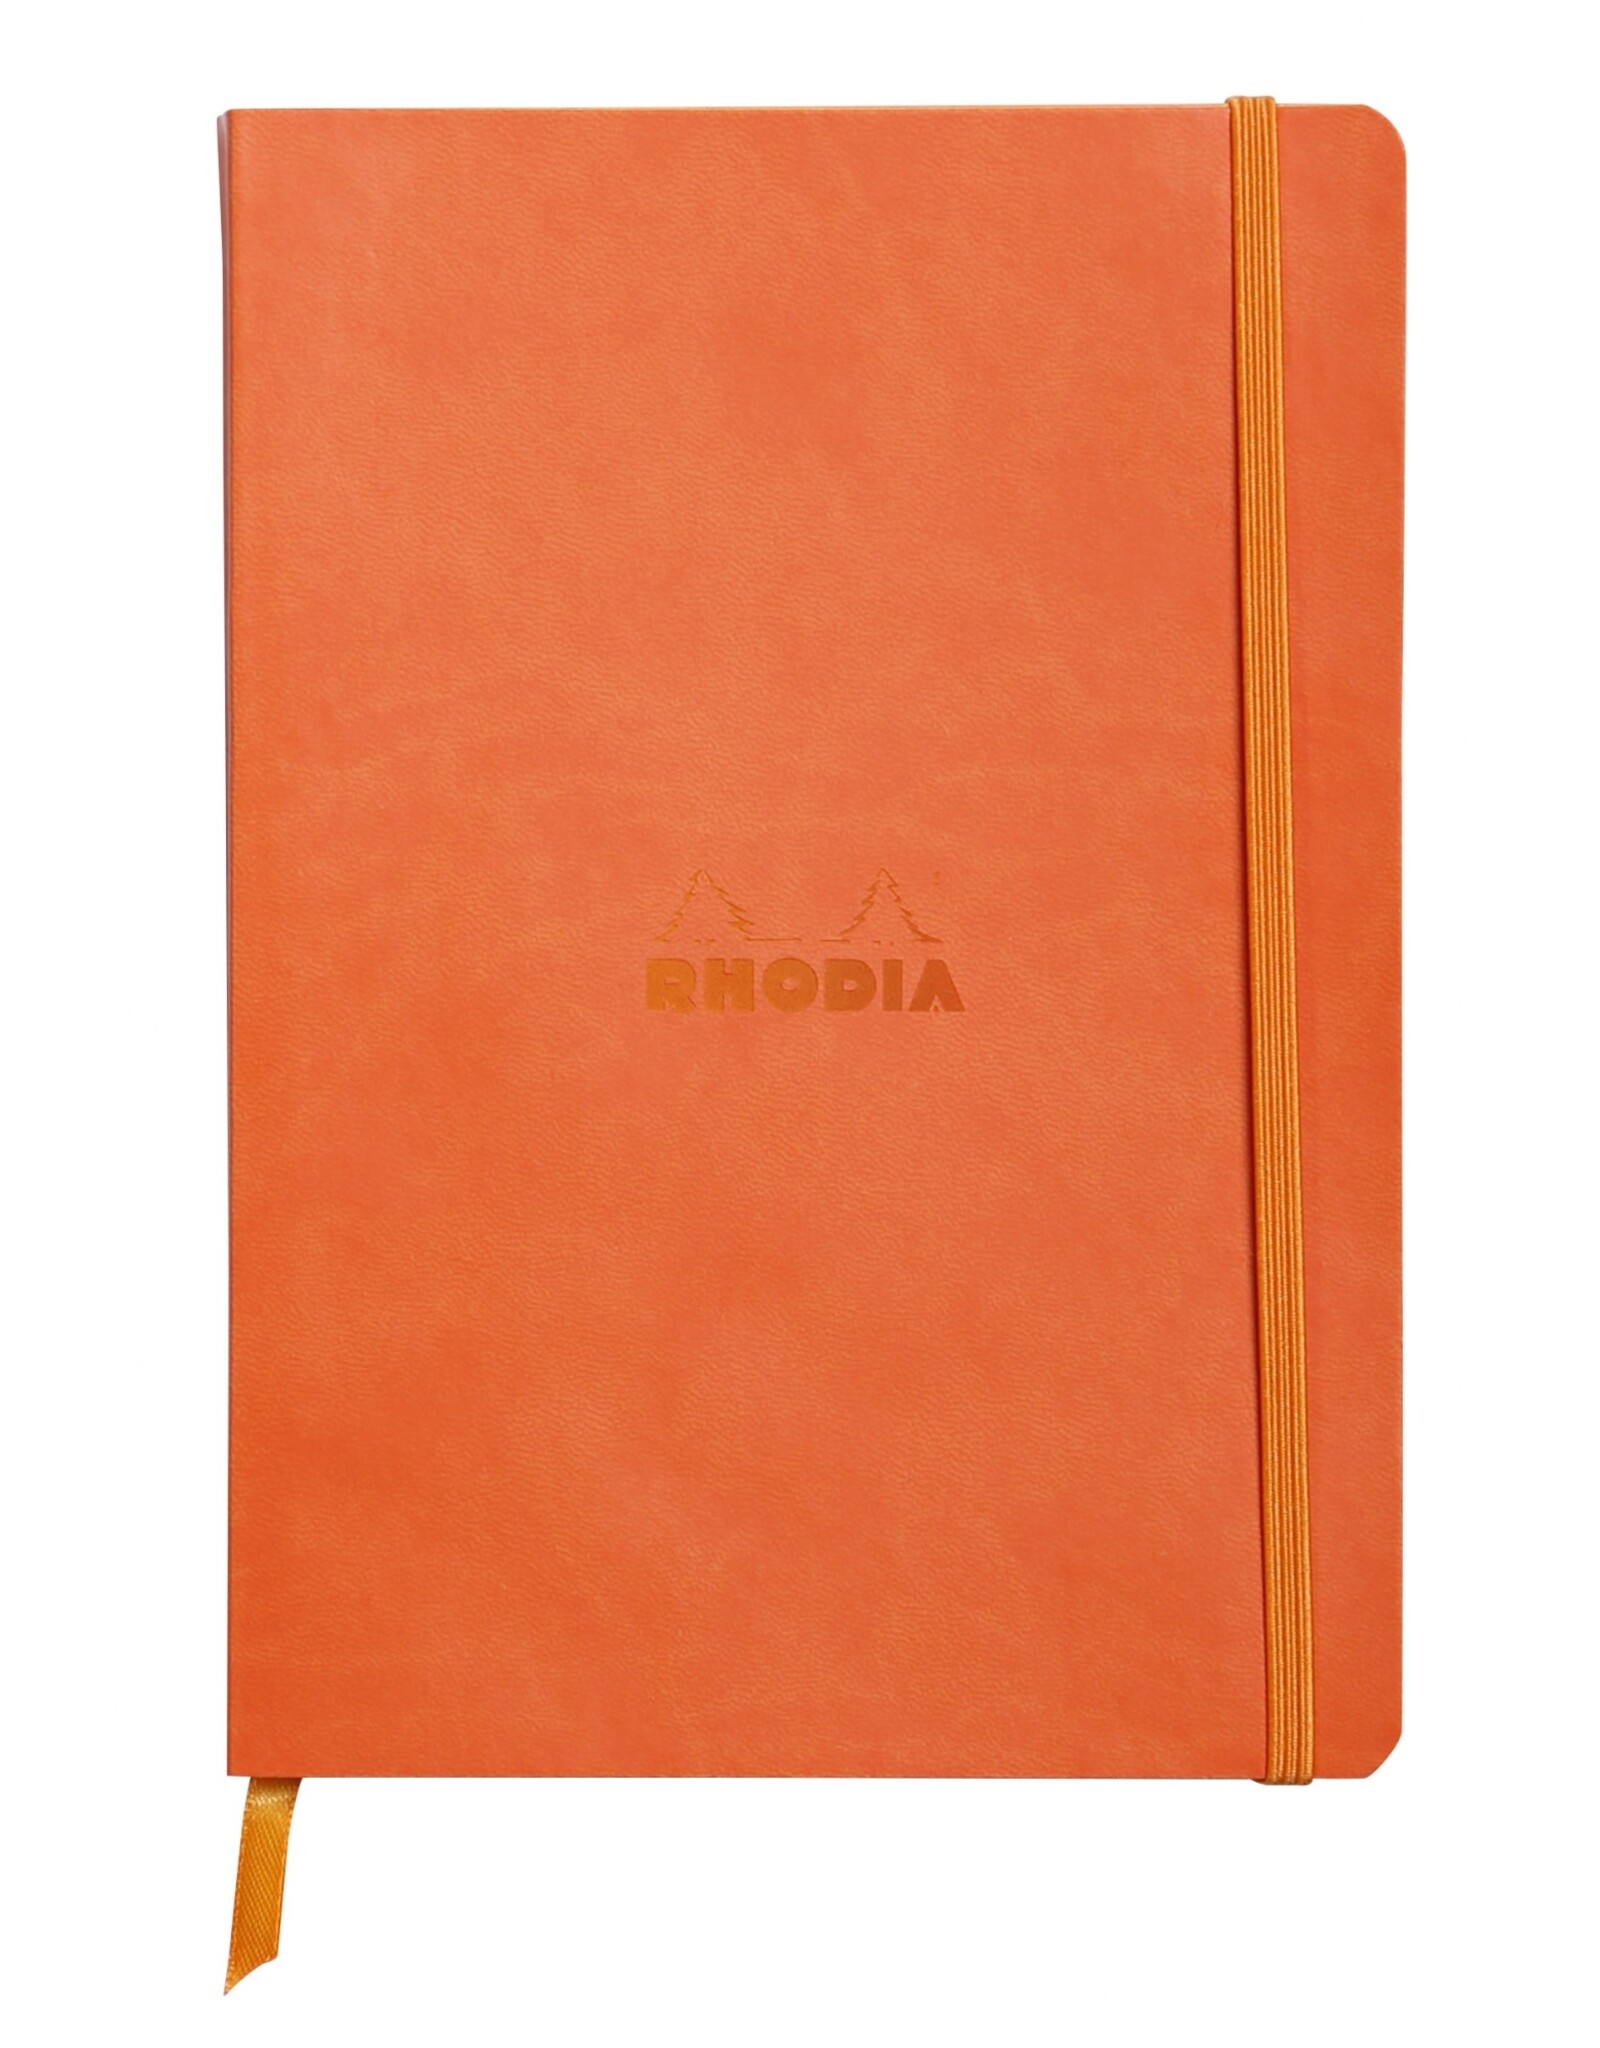 Rhodia Rhodia Rhodiarama SoftCover Notebook, 80 Dotted Sheets, 6" x 8 1/4", Tangerine